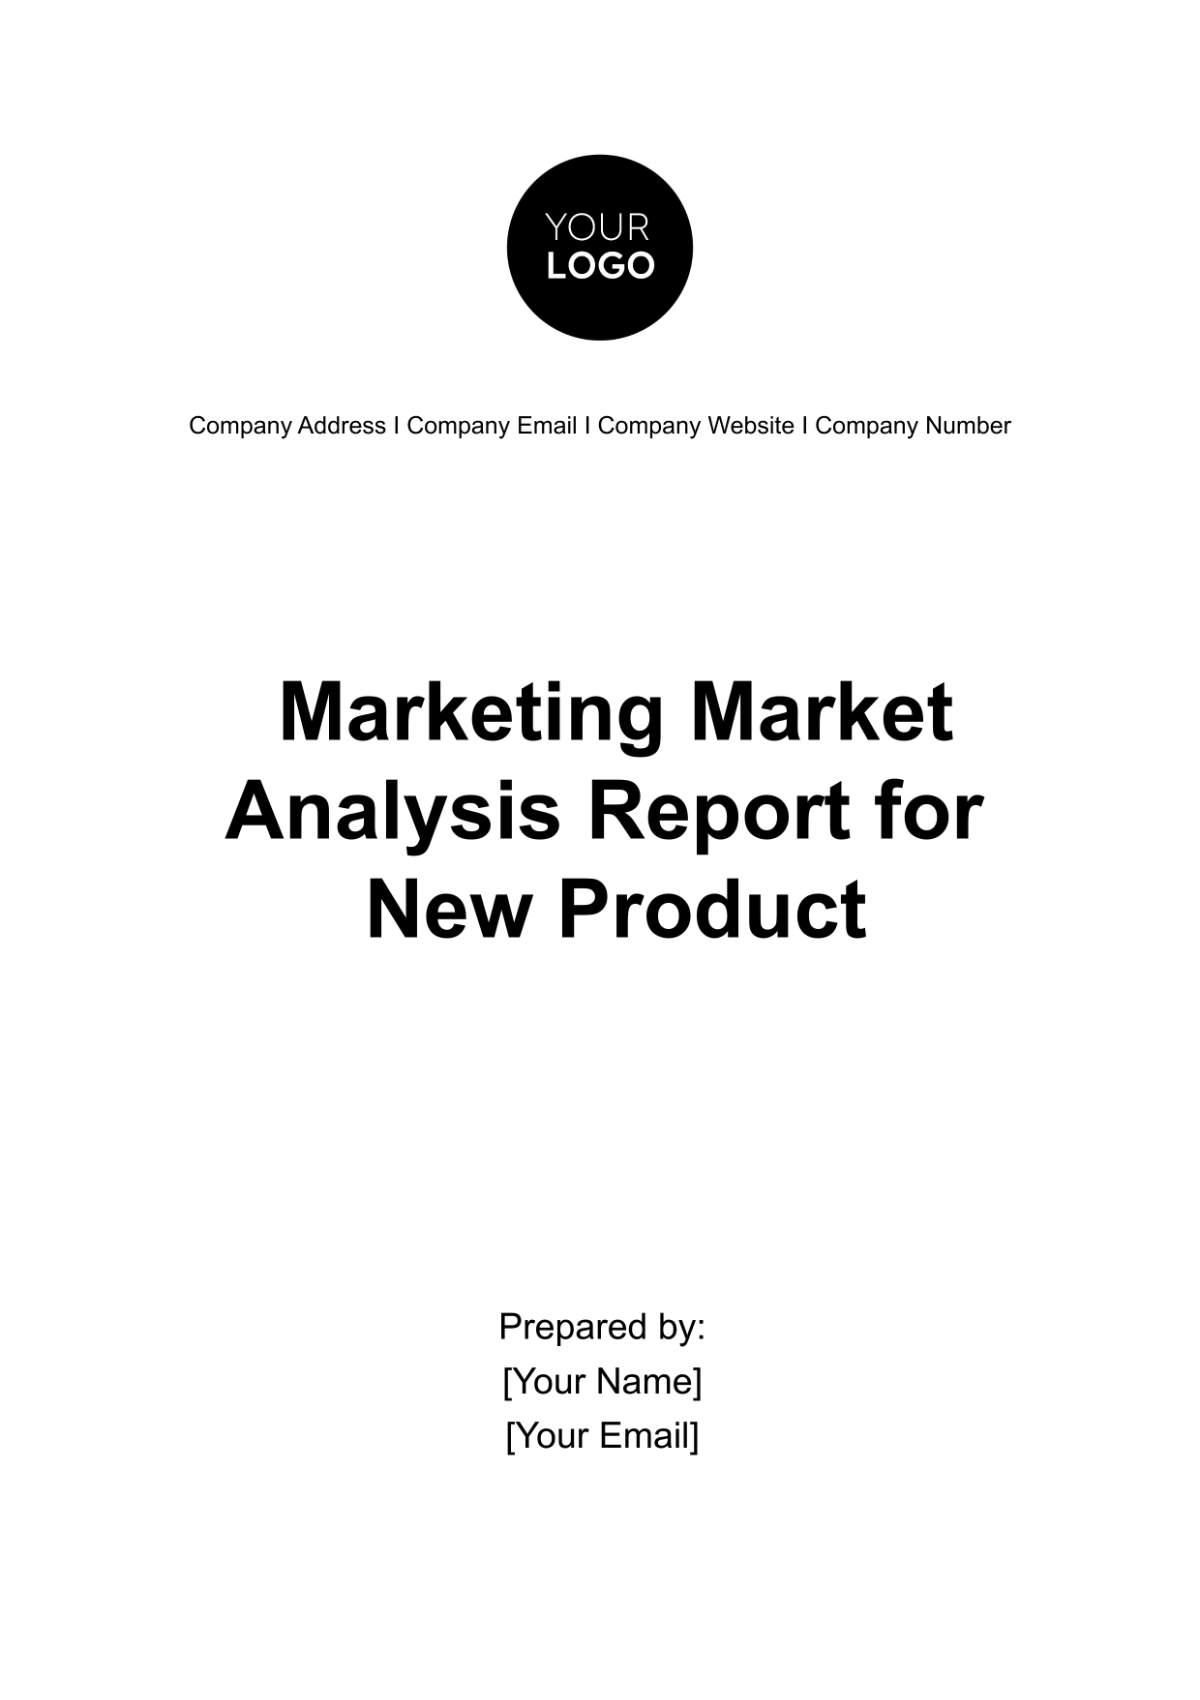 Free Marketing Market Analysis Report for New Product Template